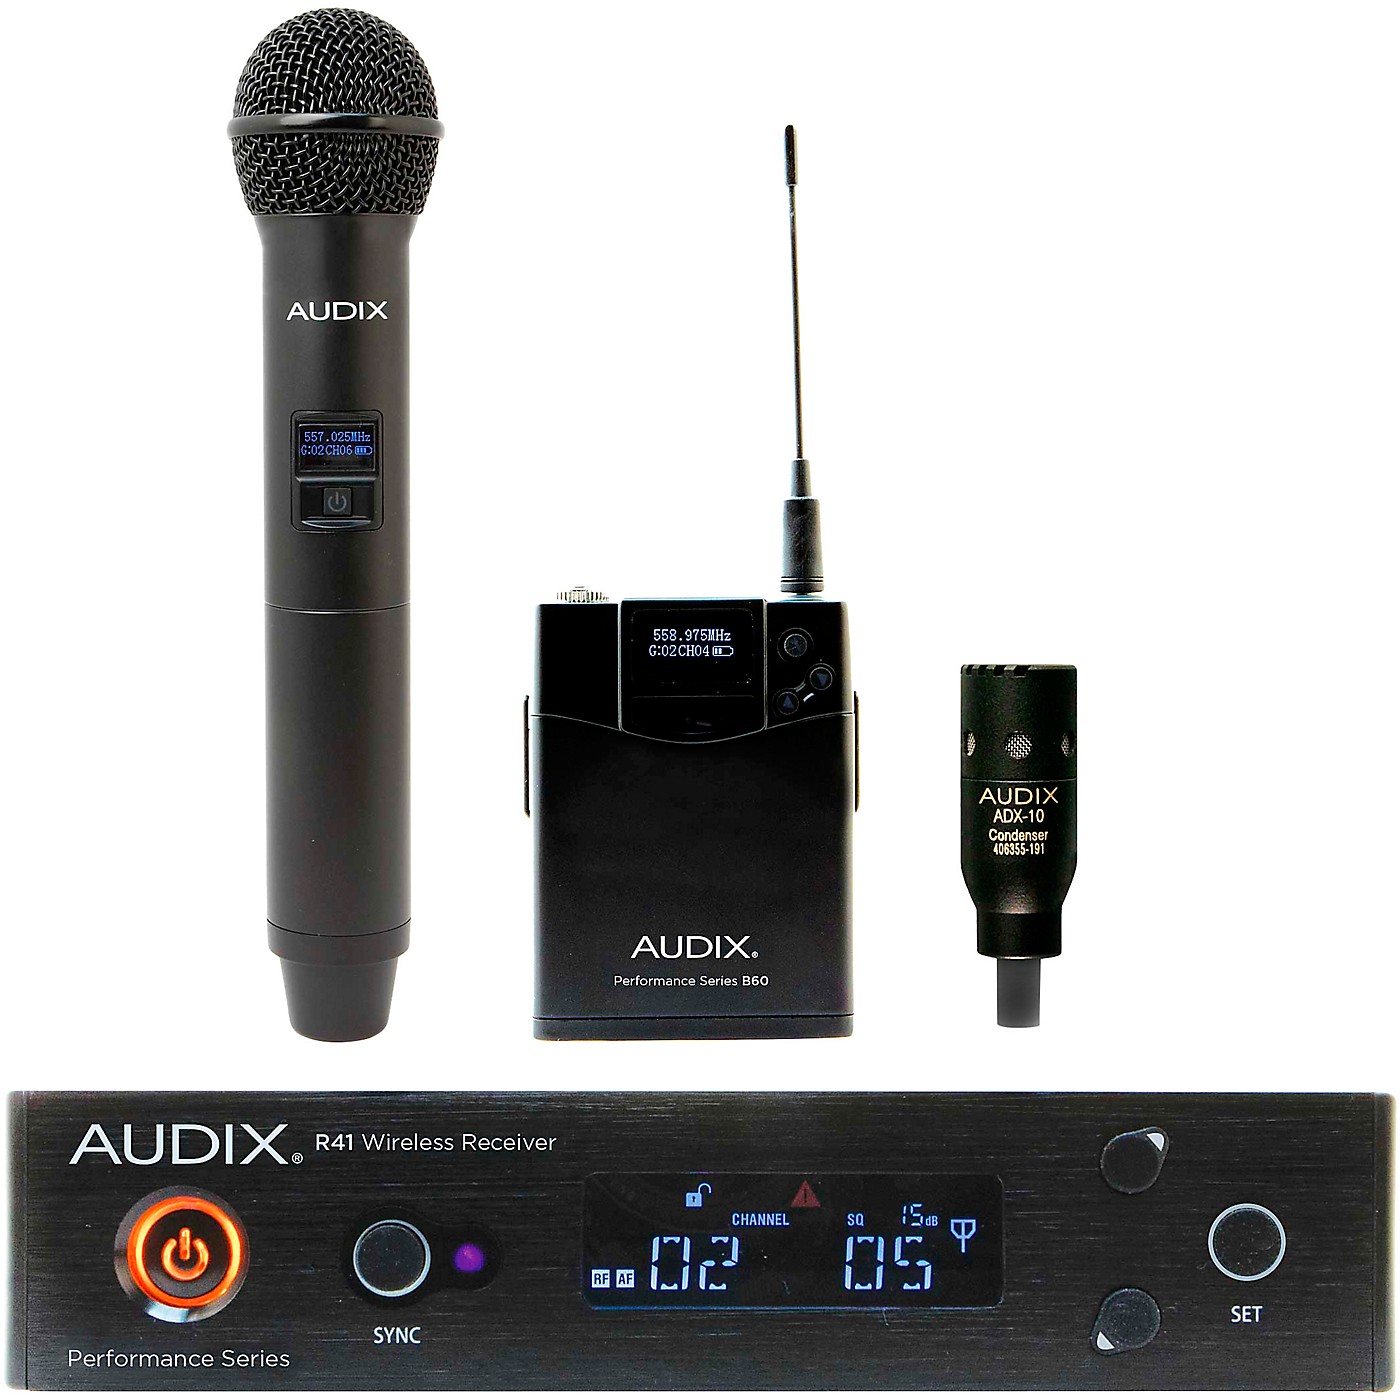 Audix AP41 OM2 L10 Wireless Microphone System with R41 Diversity Receiver, B60 Bodypack and H60/OM2 Handheld Transmitter, and ADX10 Lavalier Microphone thumbnail